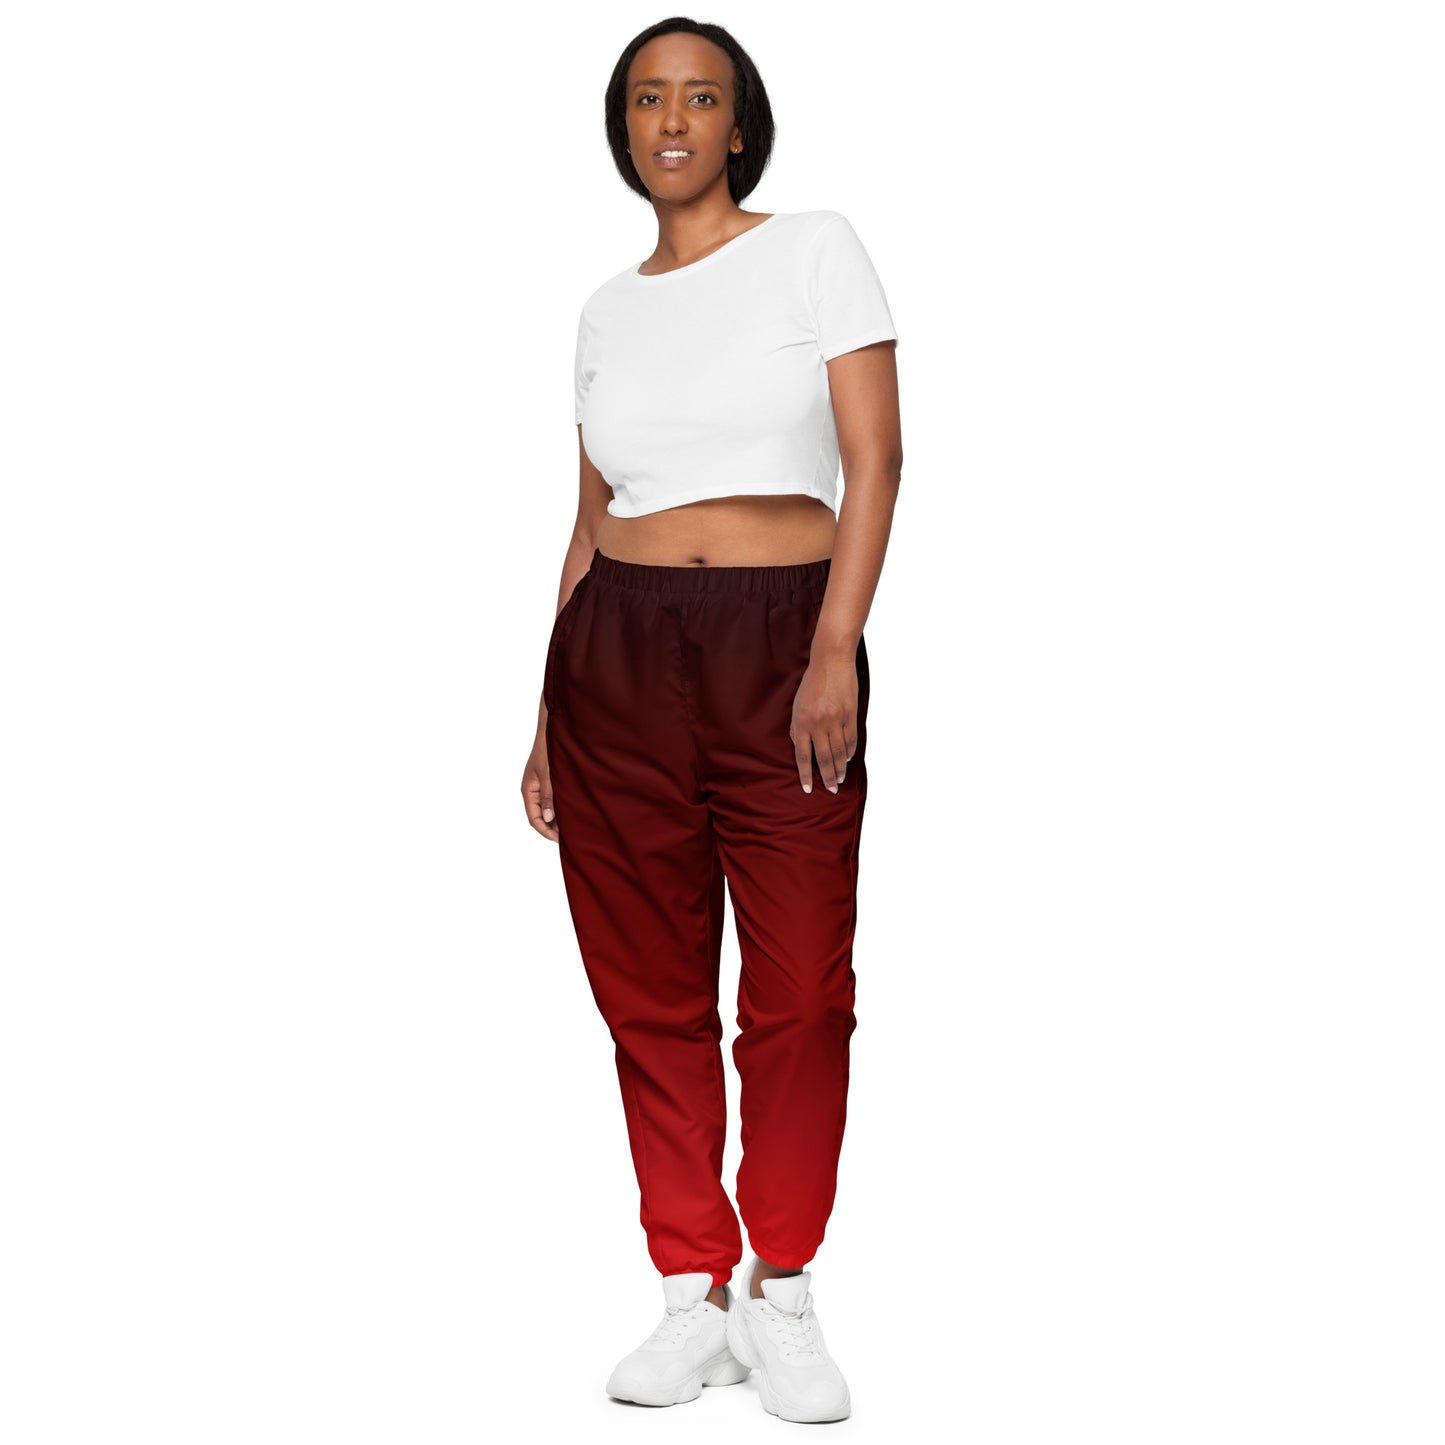 Gradient Black to Red Unisex track pants